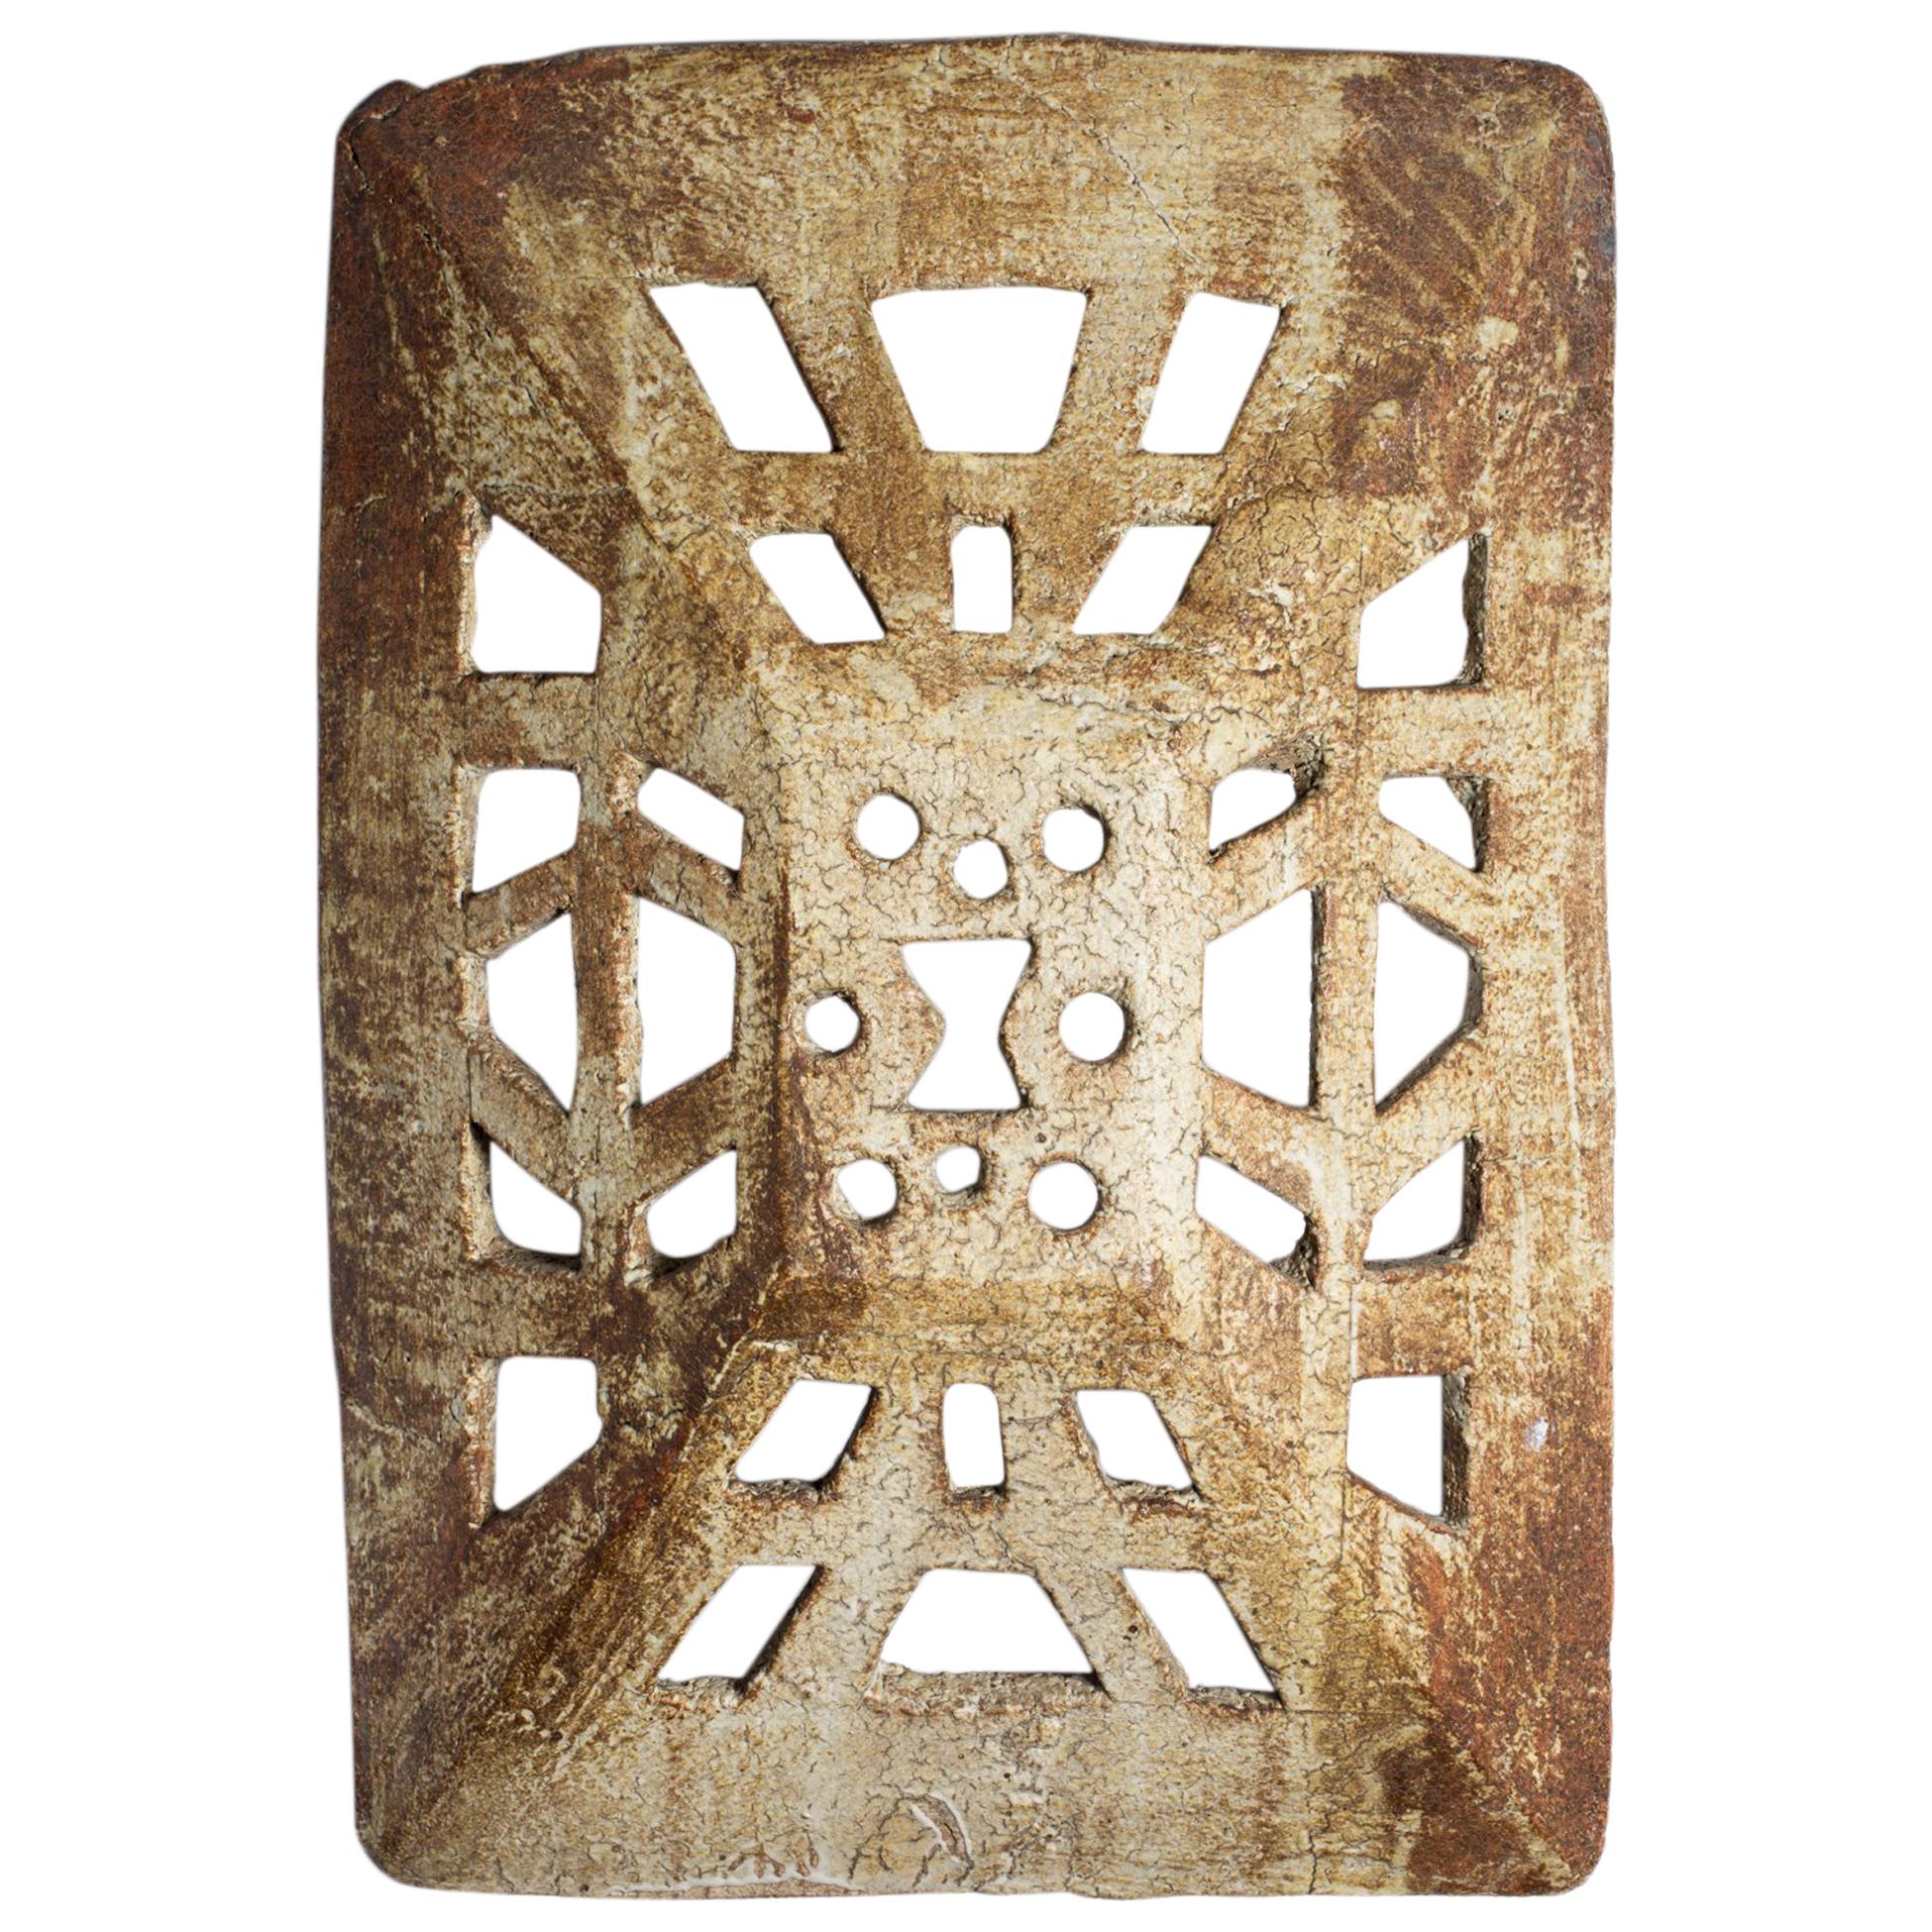 Spectacular Ceramic Wall Sconce by Jean-Pierre Viot, circa 1970